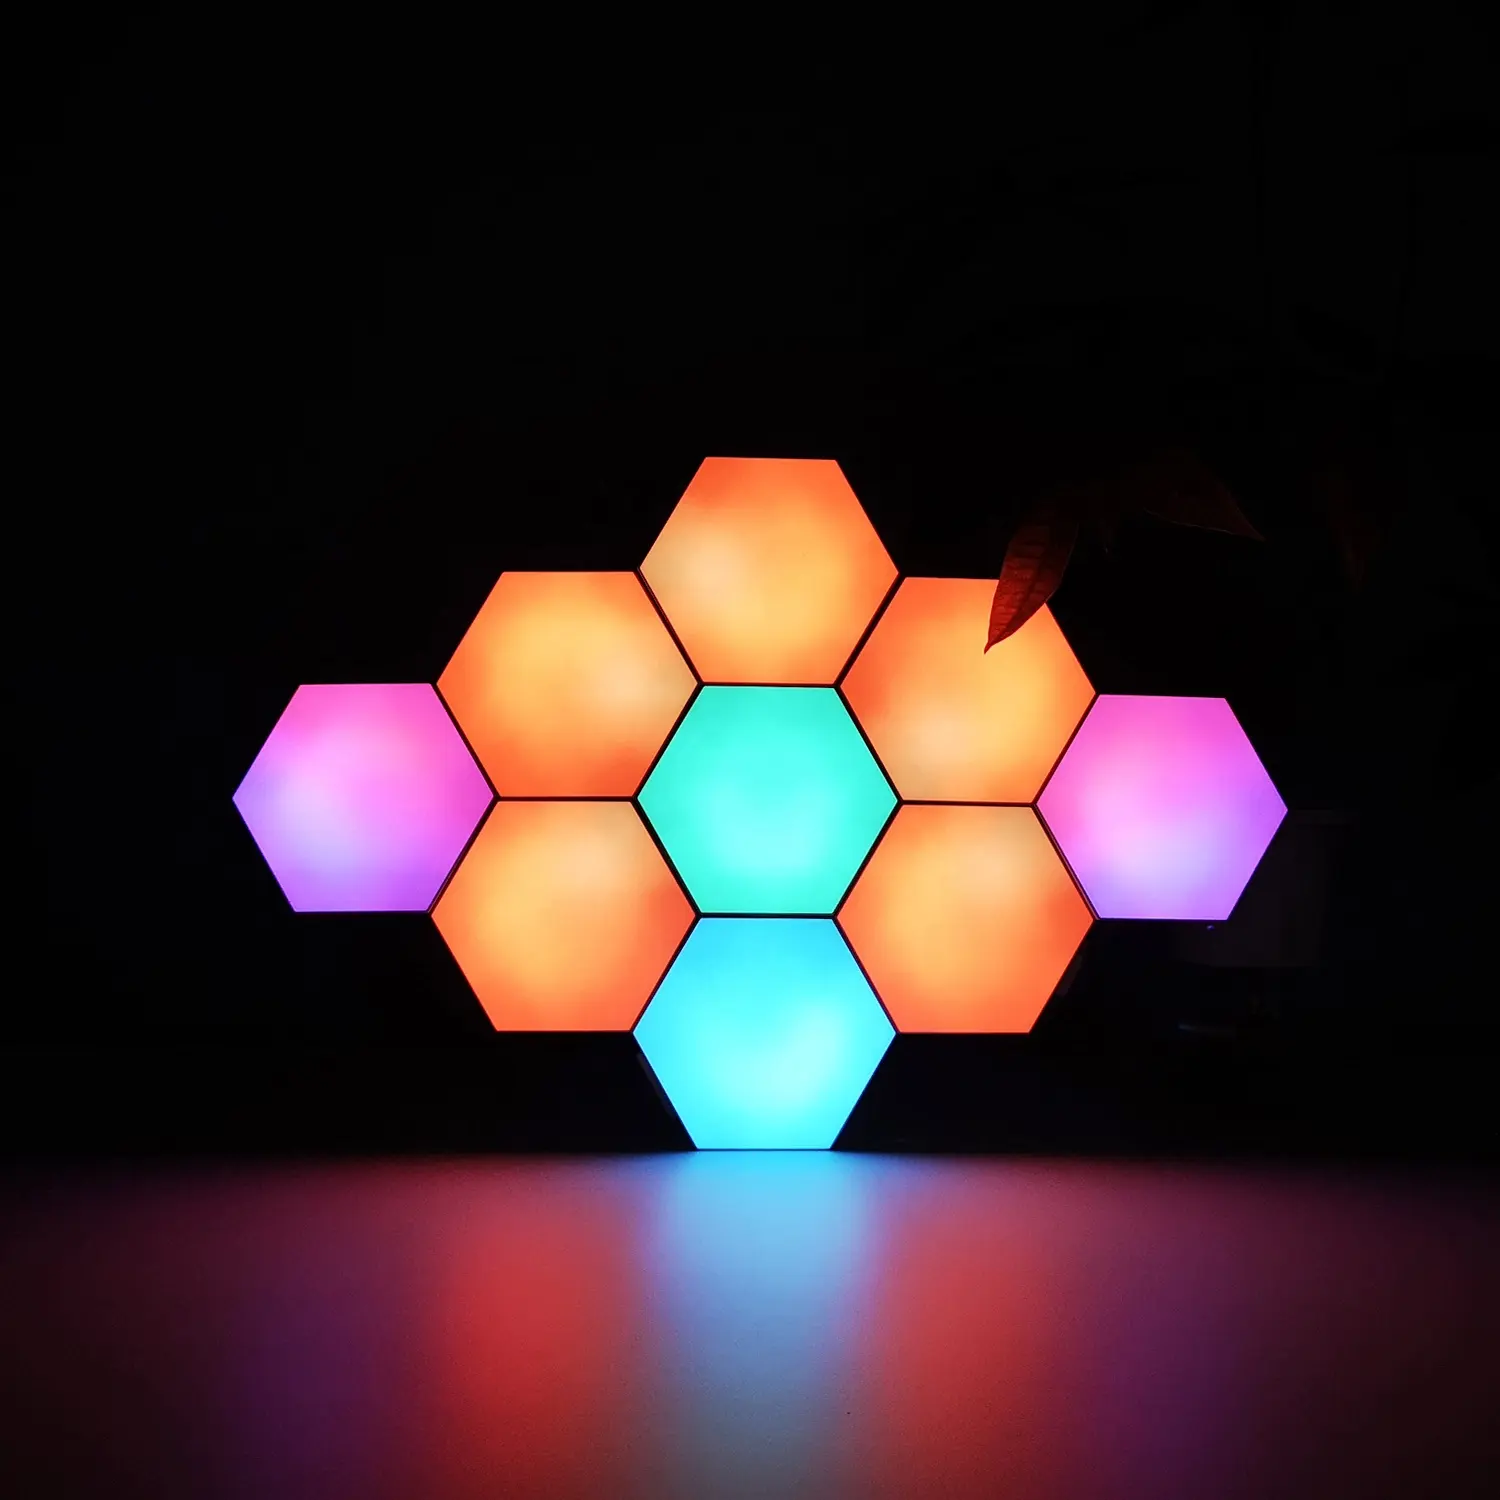 LED lights controlled by phone